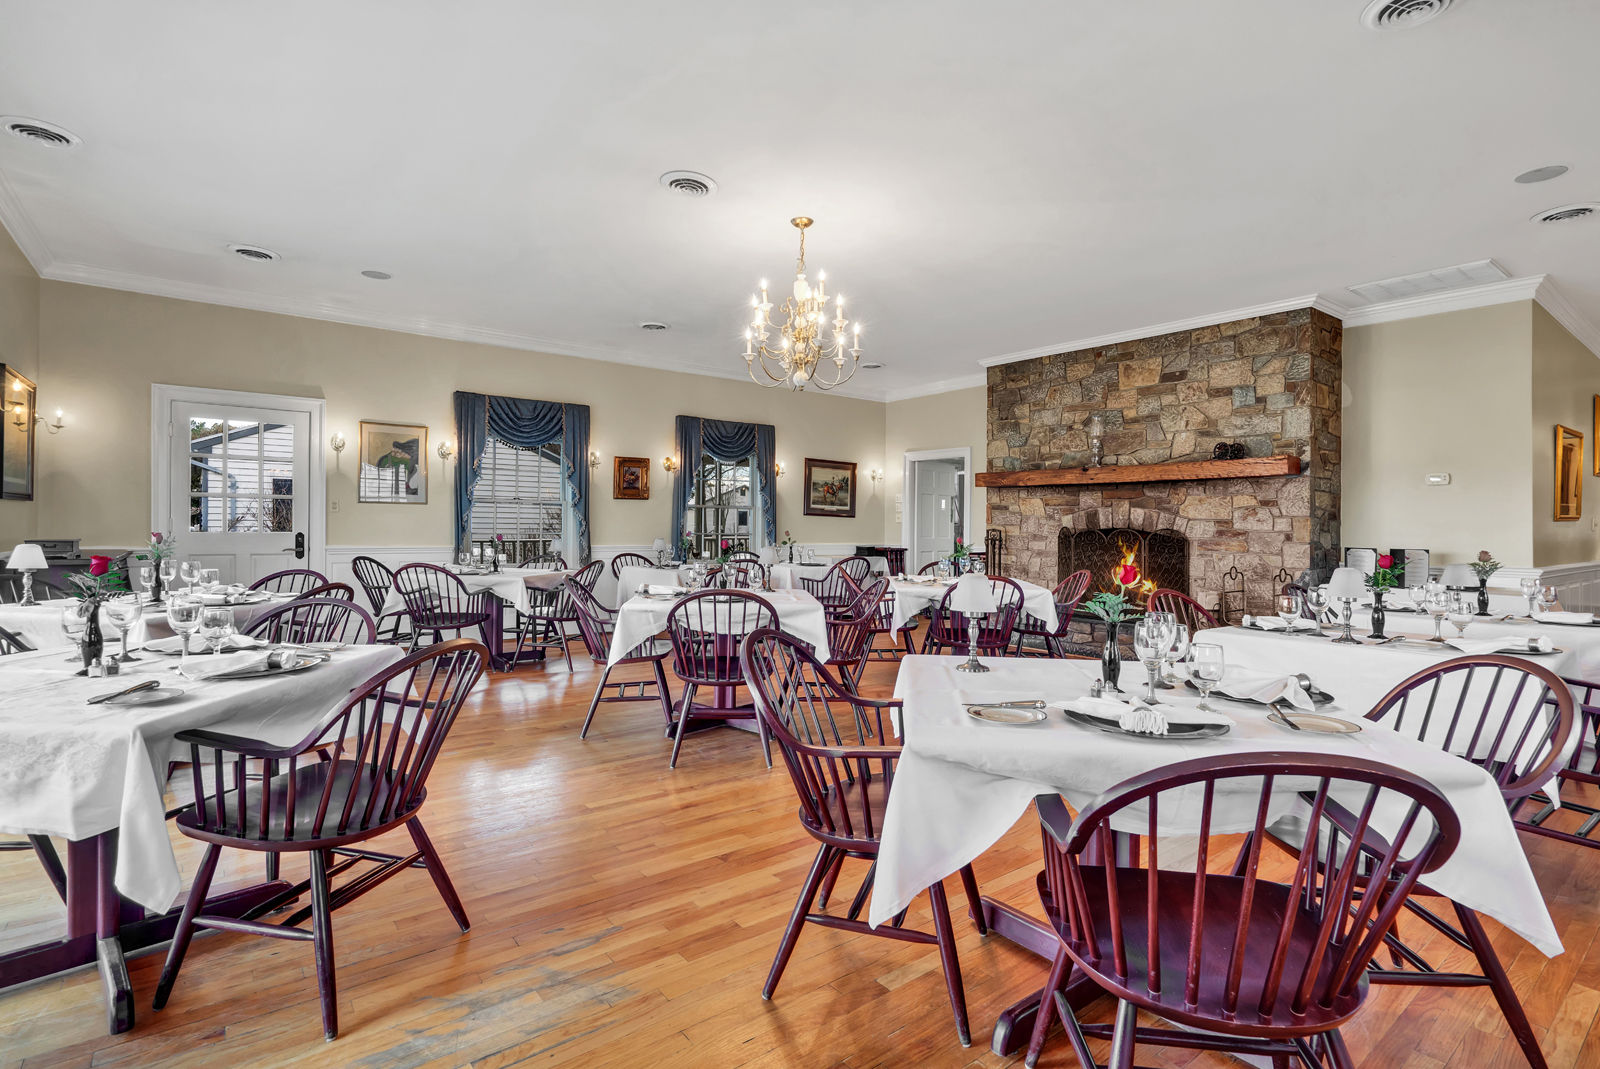 The Inn and Kelly's Ford also includes a restaurant and a pub. (Courtesy Auction Markets LLC)